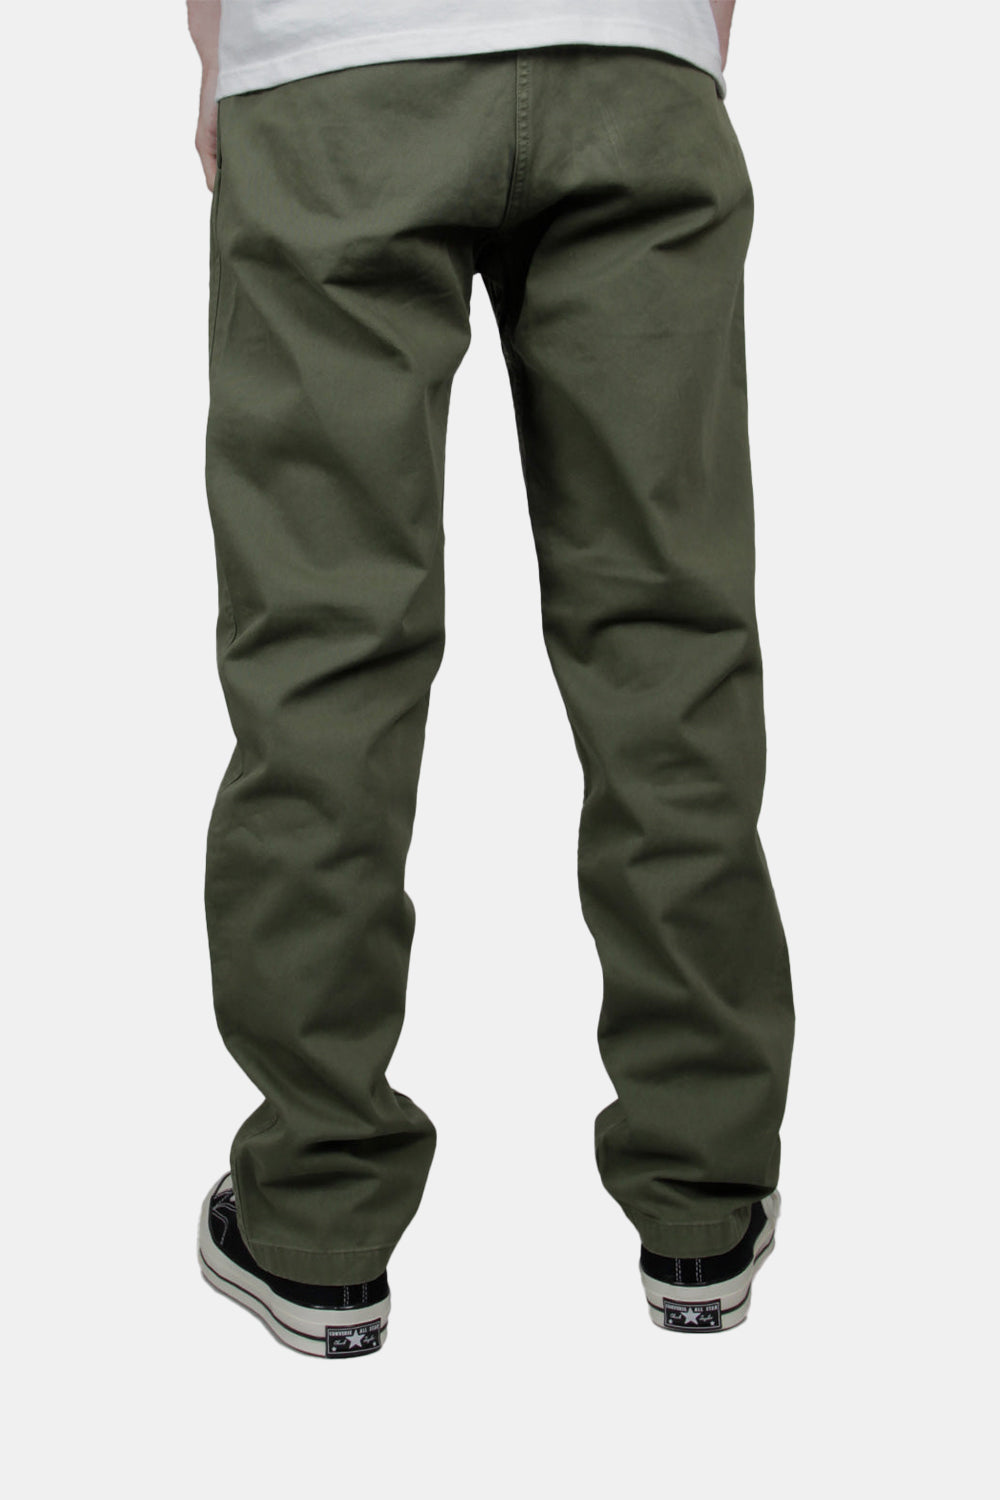 Gramicci G Pants Double-ringspun Organic Cotton Twill (Olive) | Number Six